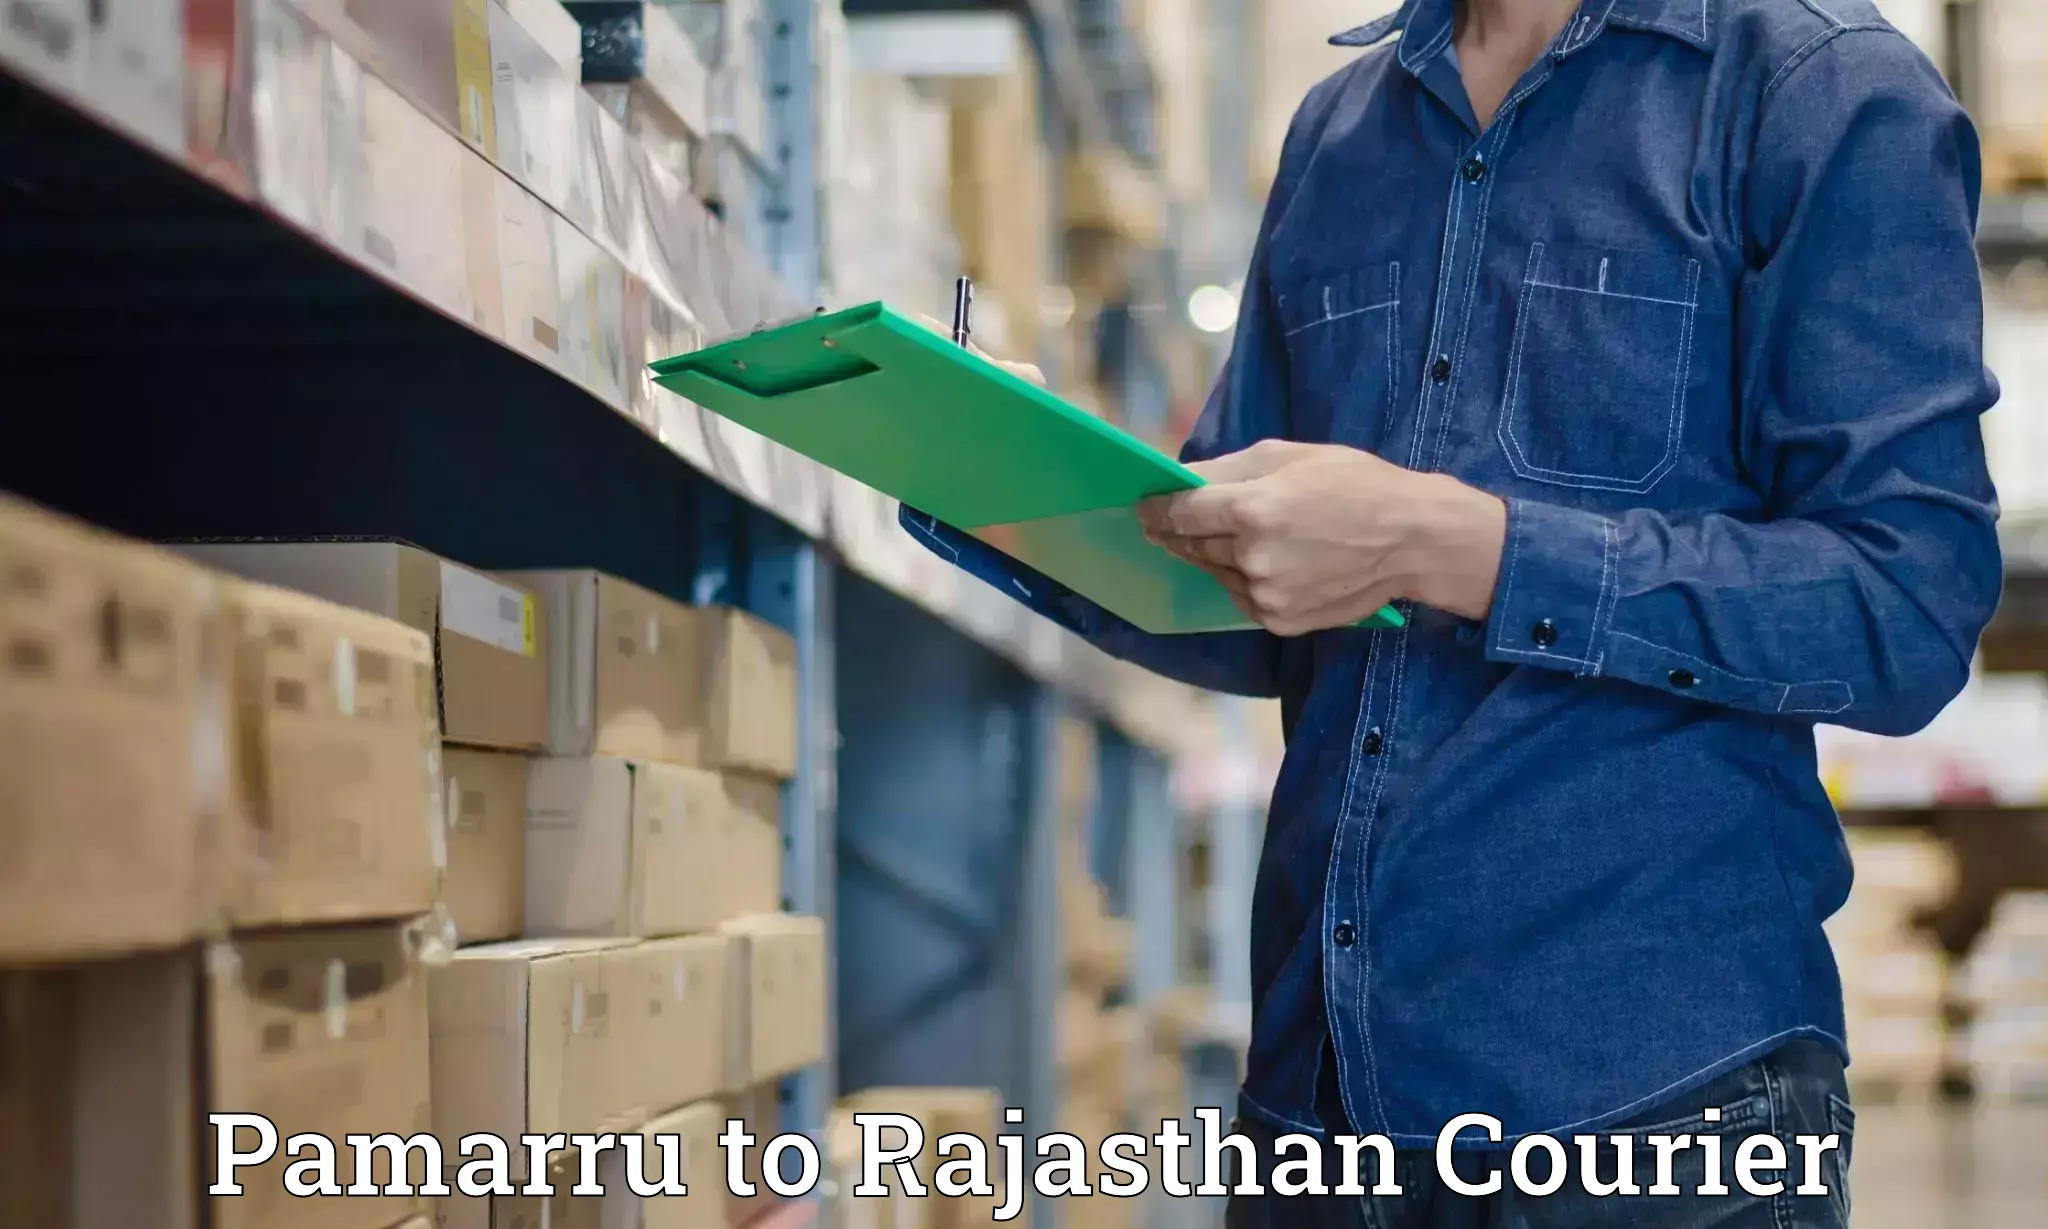 Next-day delivery options Pamarru to Rajasthan